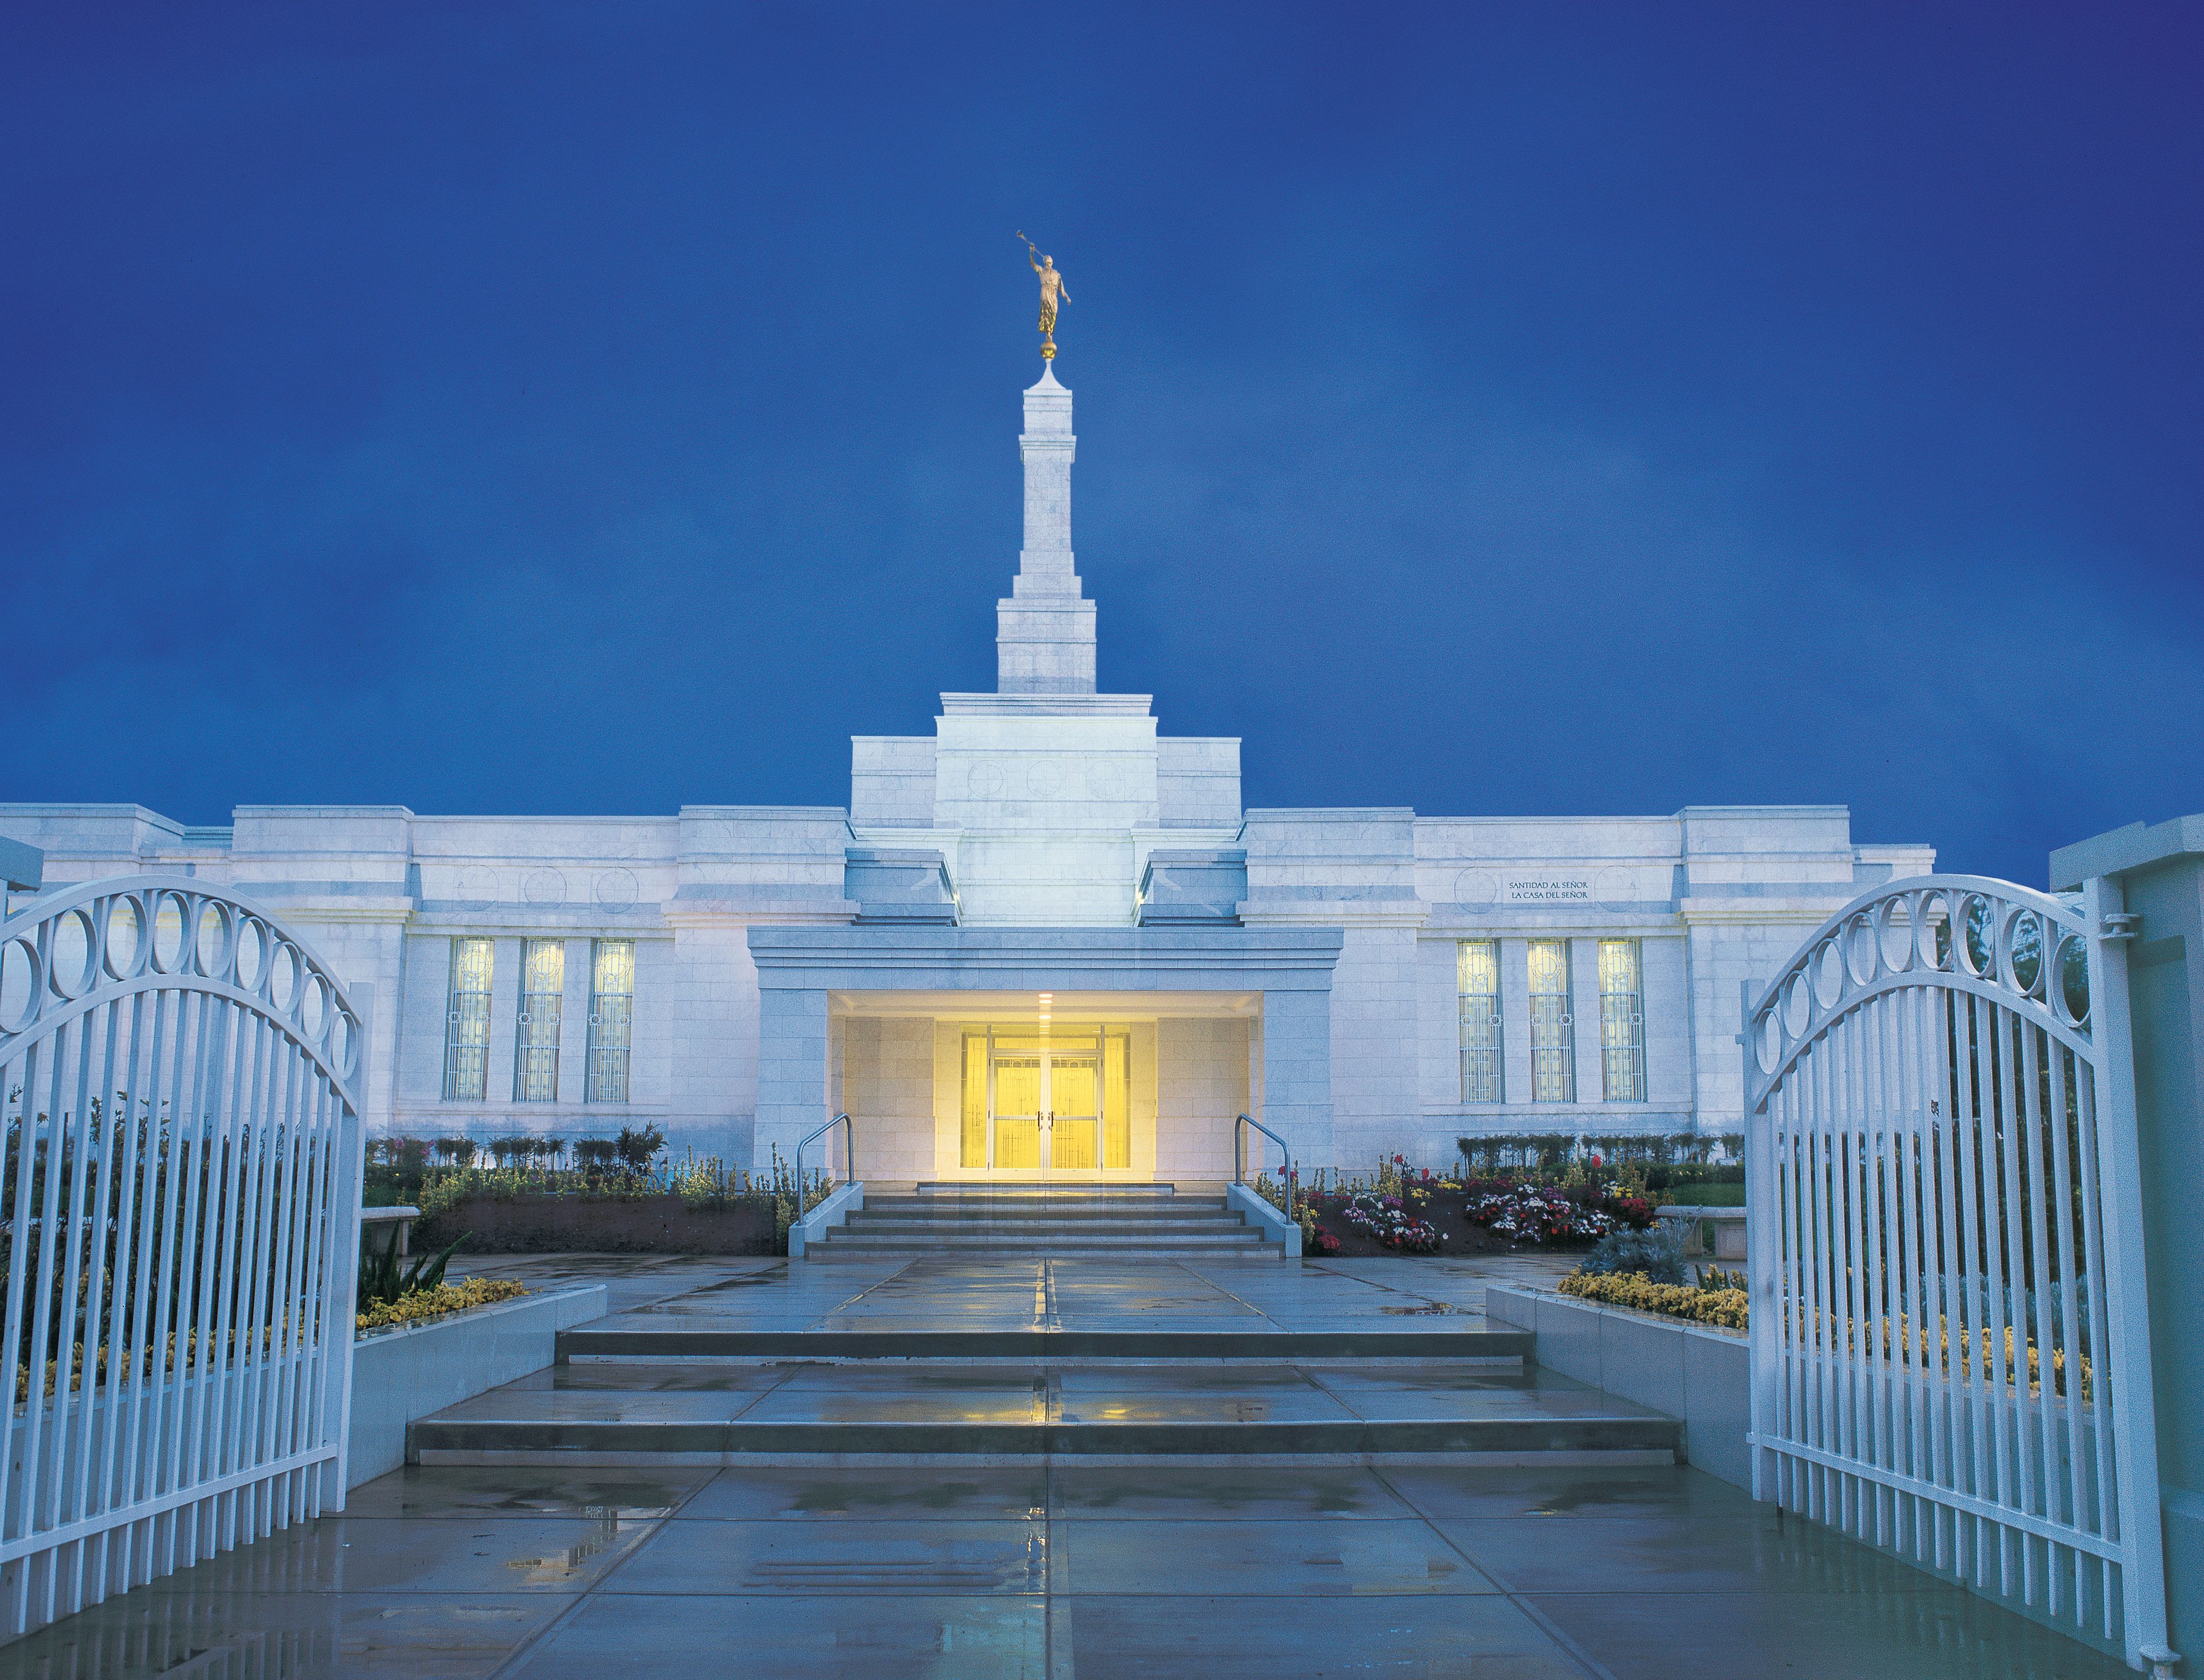 The Oaxaca Mexico Temple in the evening.